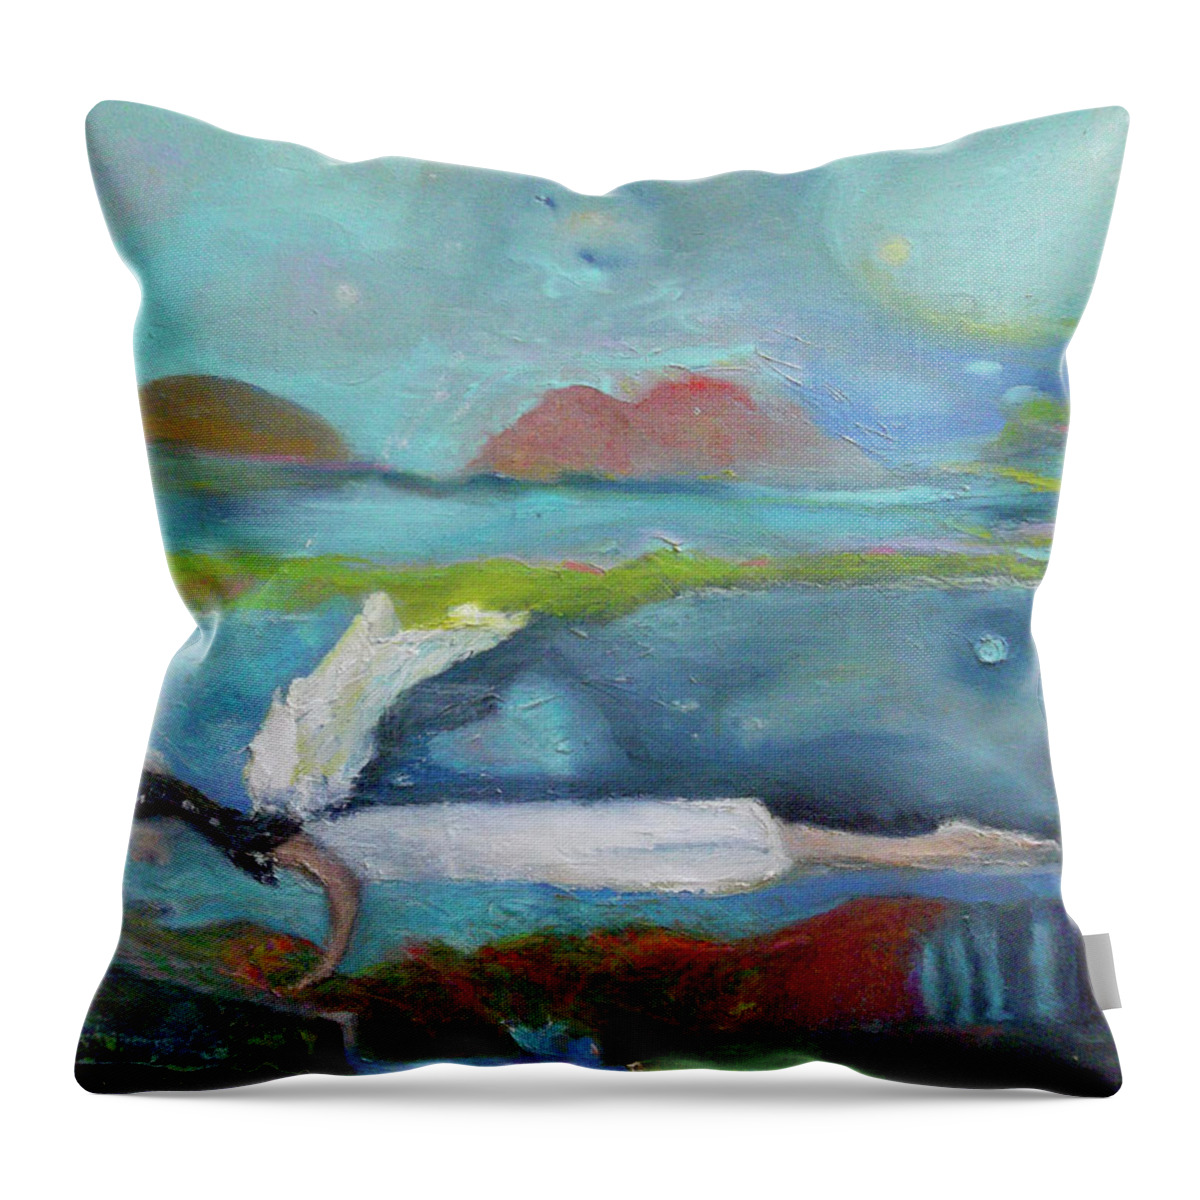 Symbolic Throw Pillow featuring the painting Astral Plane by Susan Esbensen